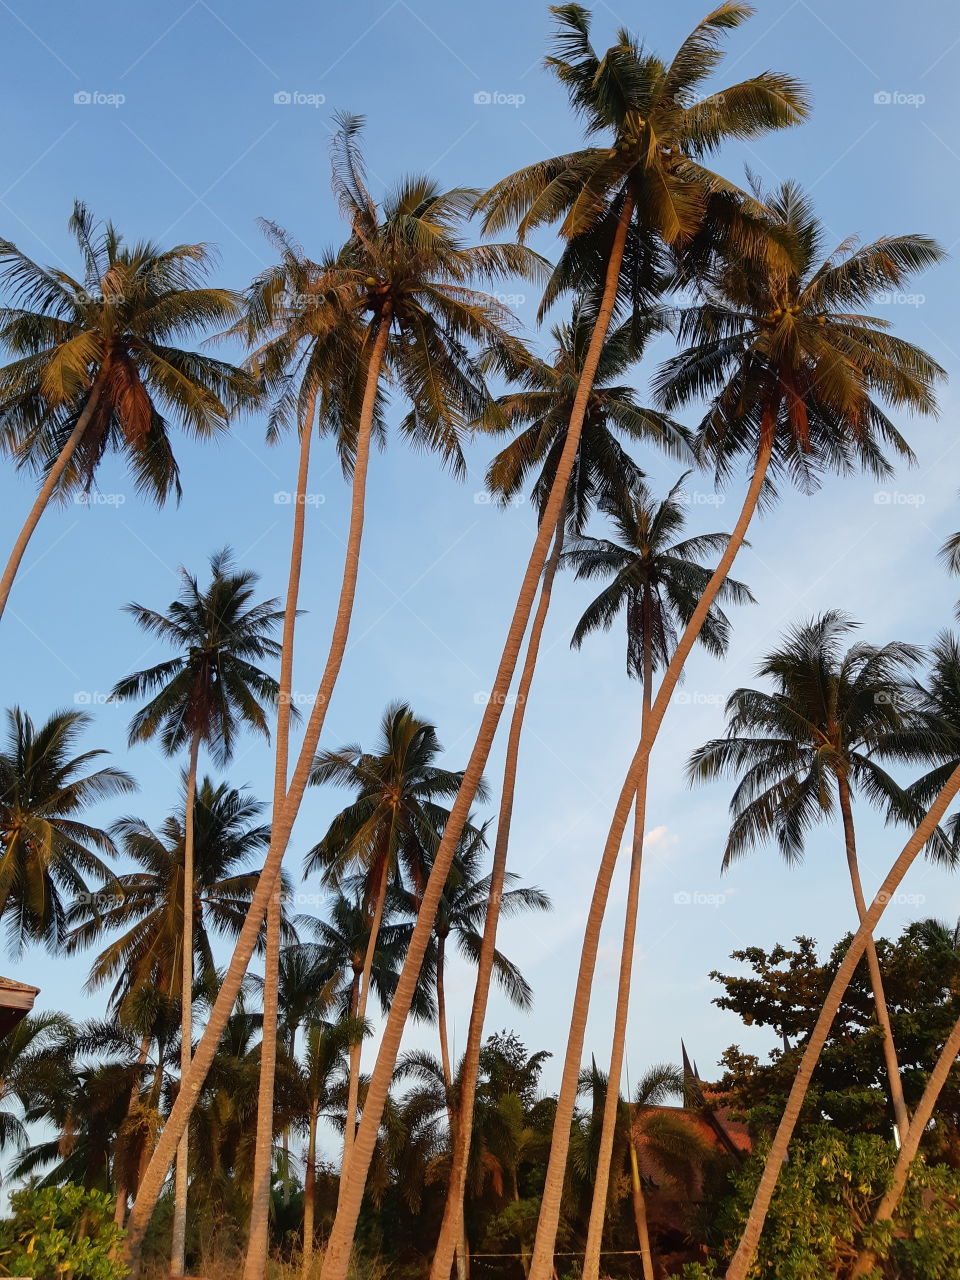 the dance of coconut palms blushed by the sun